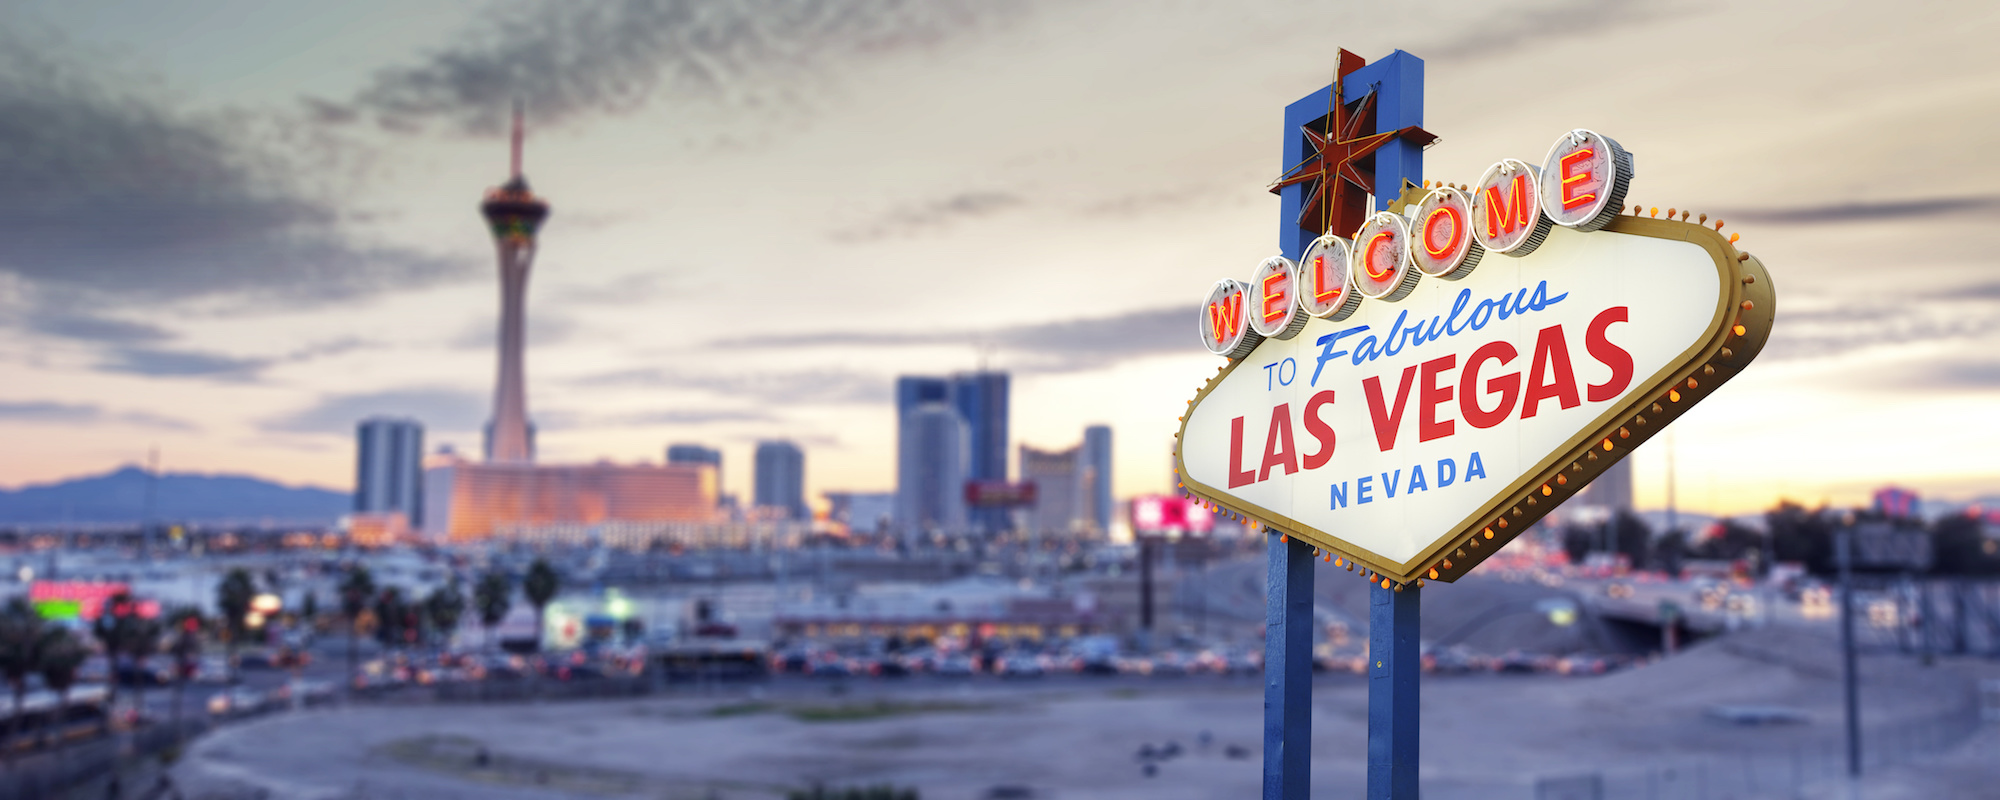 View of downtown Vegas in front of the "Welcome to Fabulous Las Vegas" sign. 